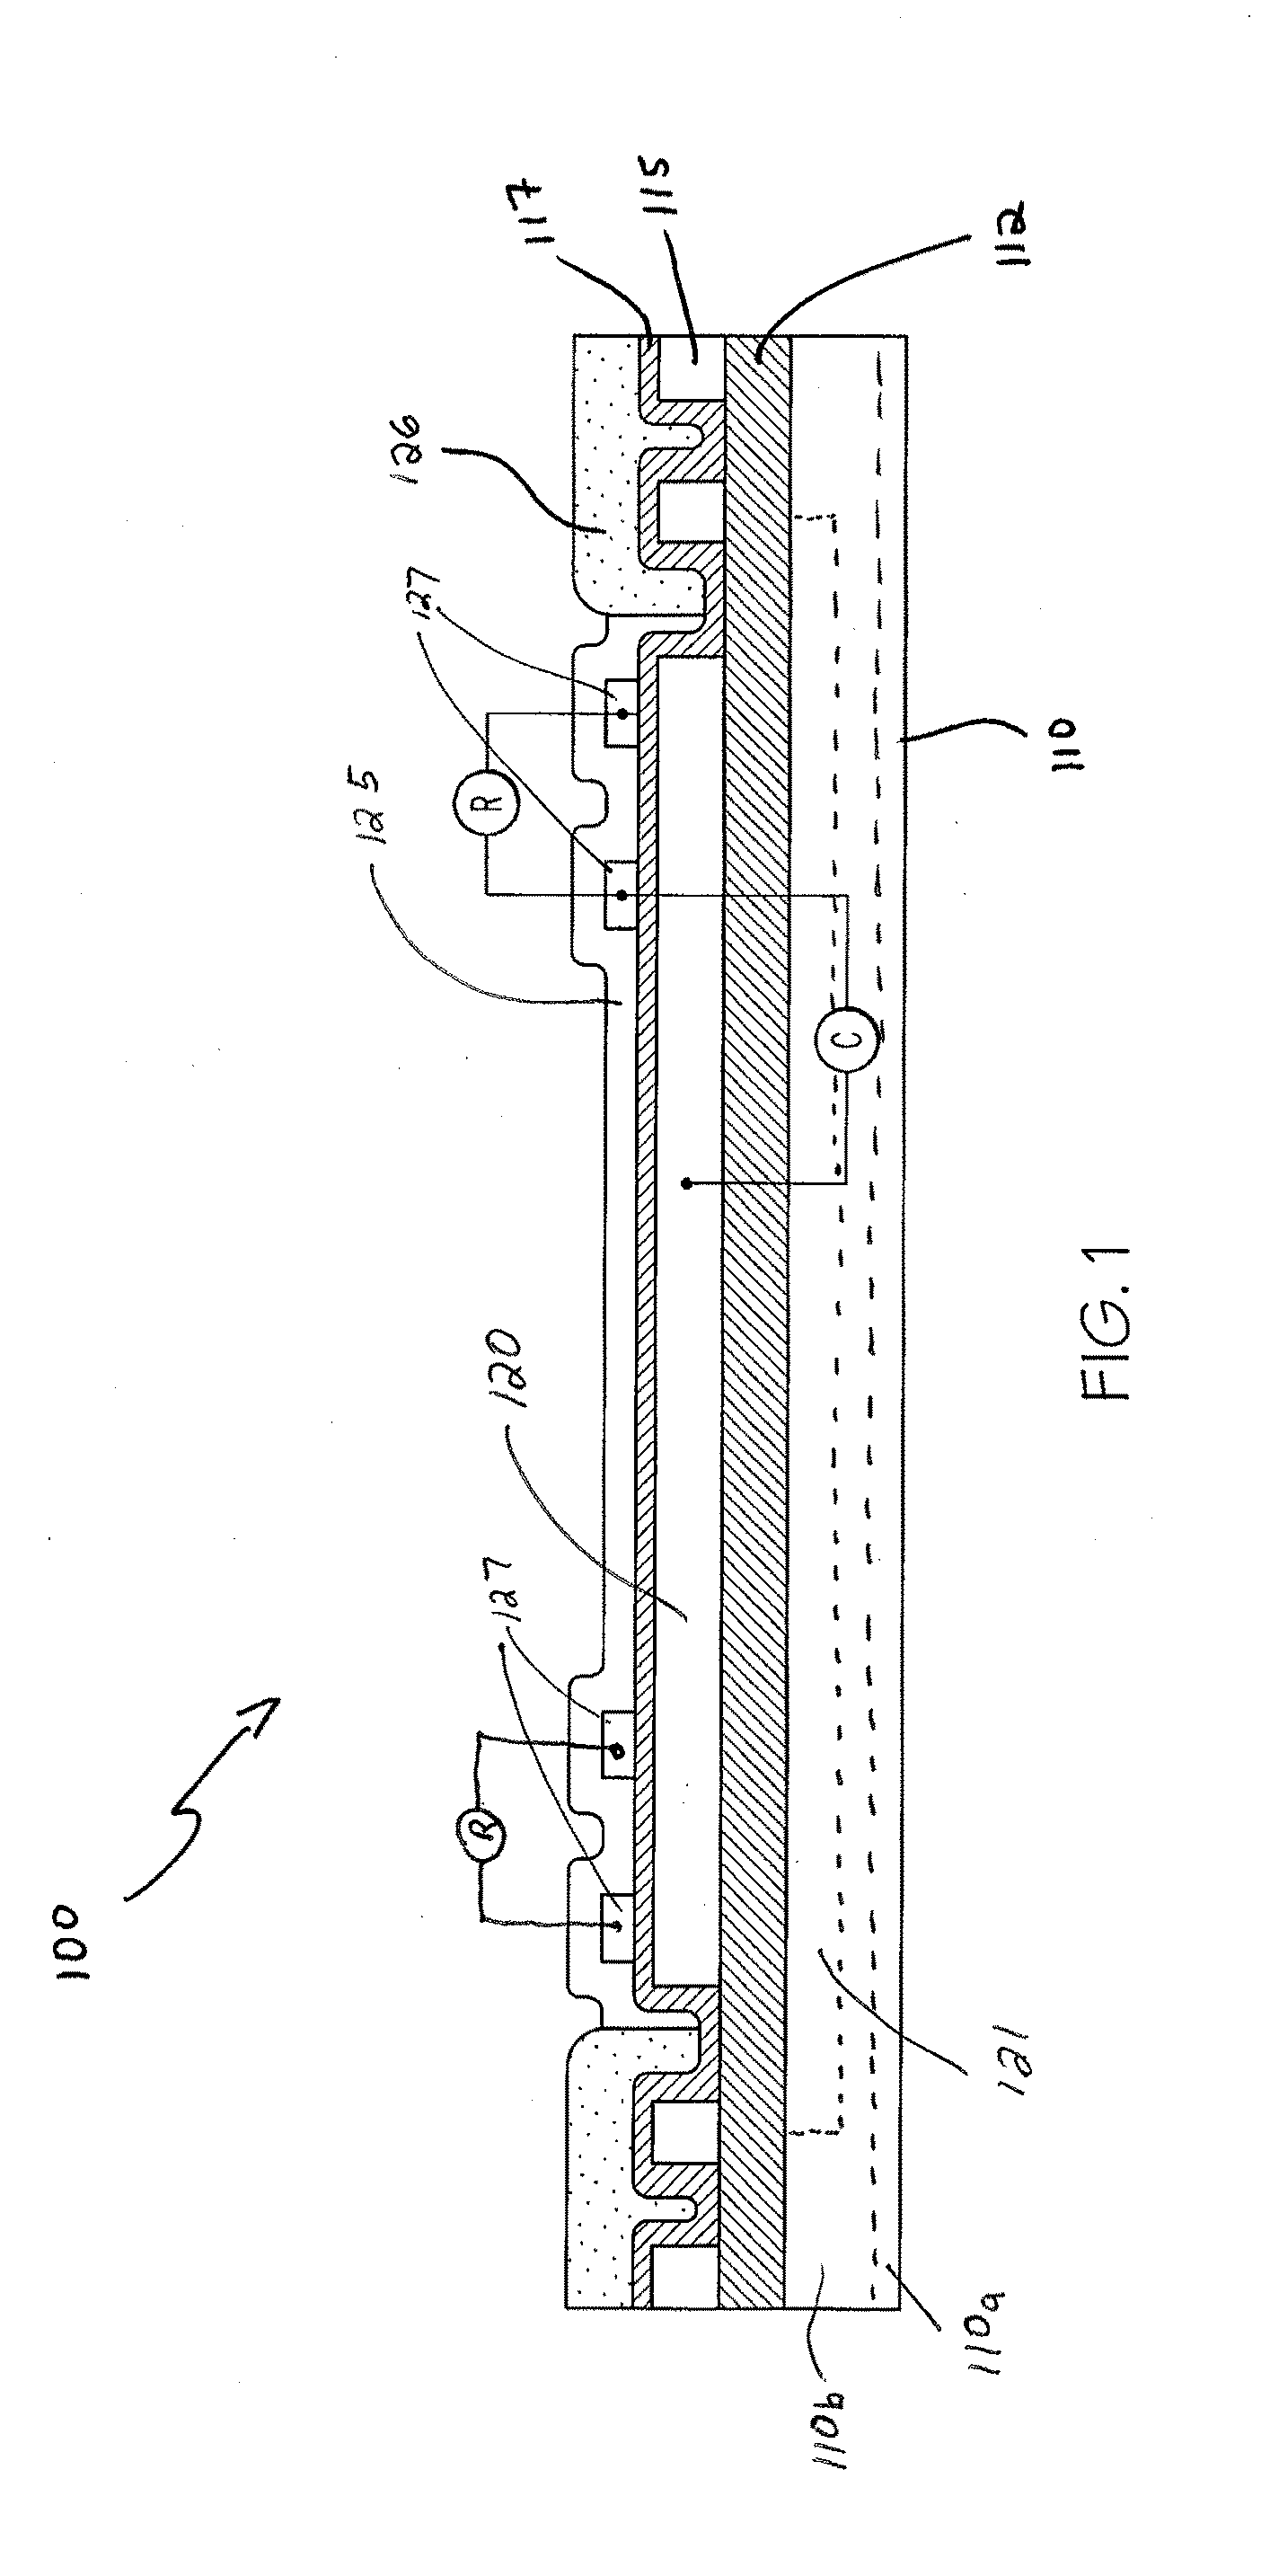 Apparatus and Method for Microfabricated Multi-Dimensional Sensors and Sensing Systems